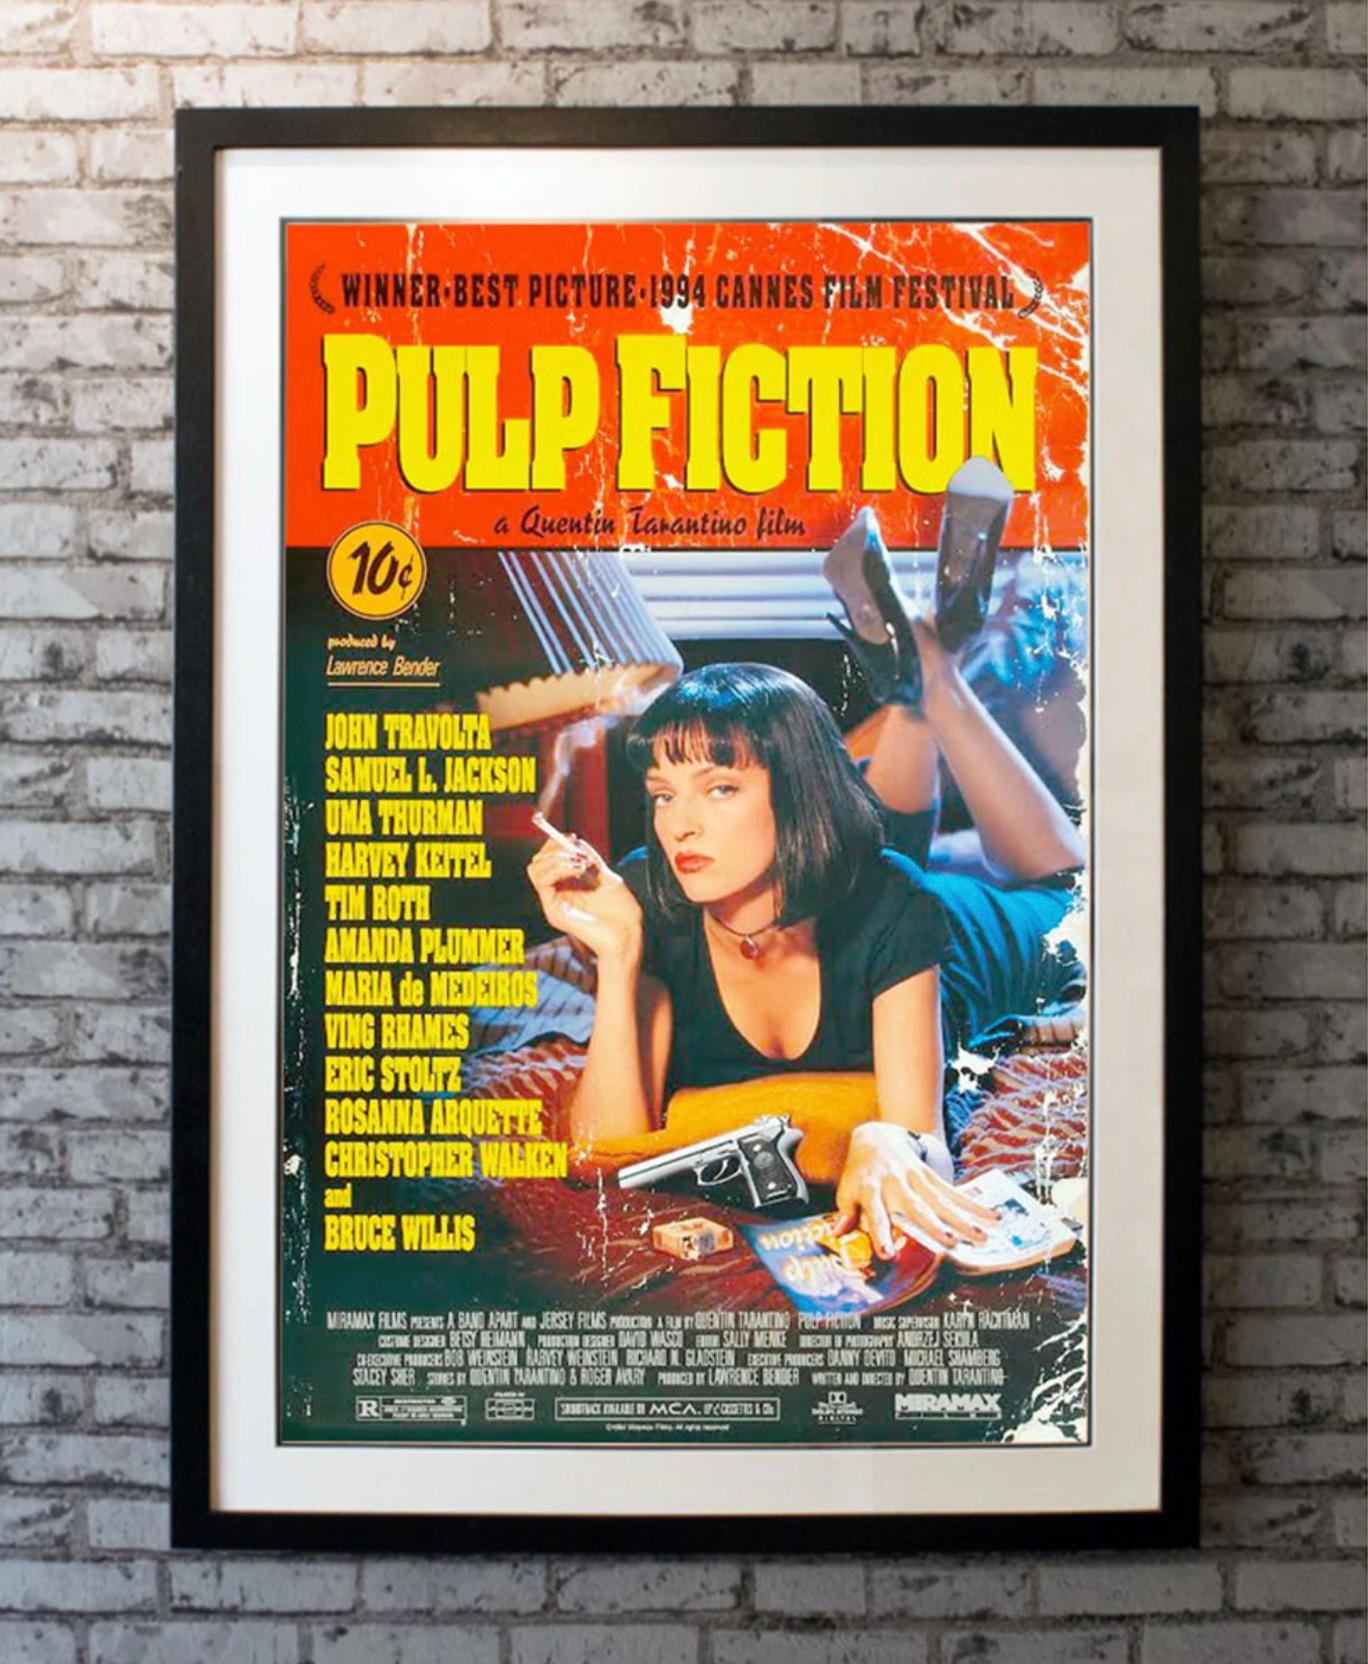 Extremely rare guaranteed original 1994 country of origin US one sheet movie poster for Quentin Tarantino’s most celebrated film to date ”Pulp Fiction”. Iconic design by Indika Entertainment Advertising makes this one of the most sought after movie